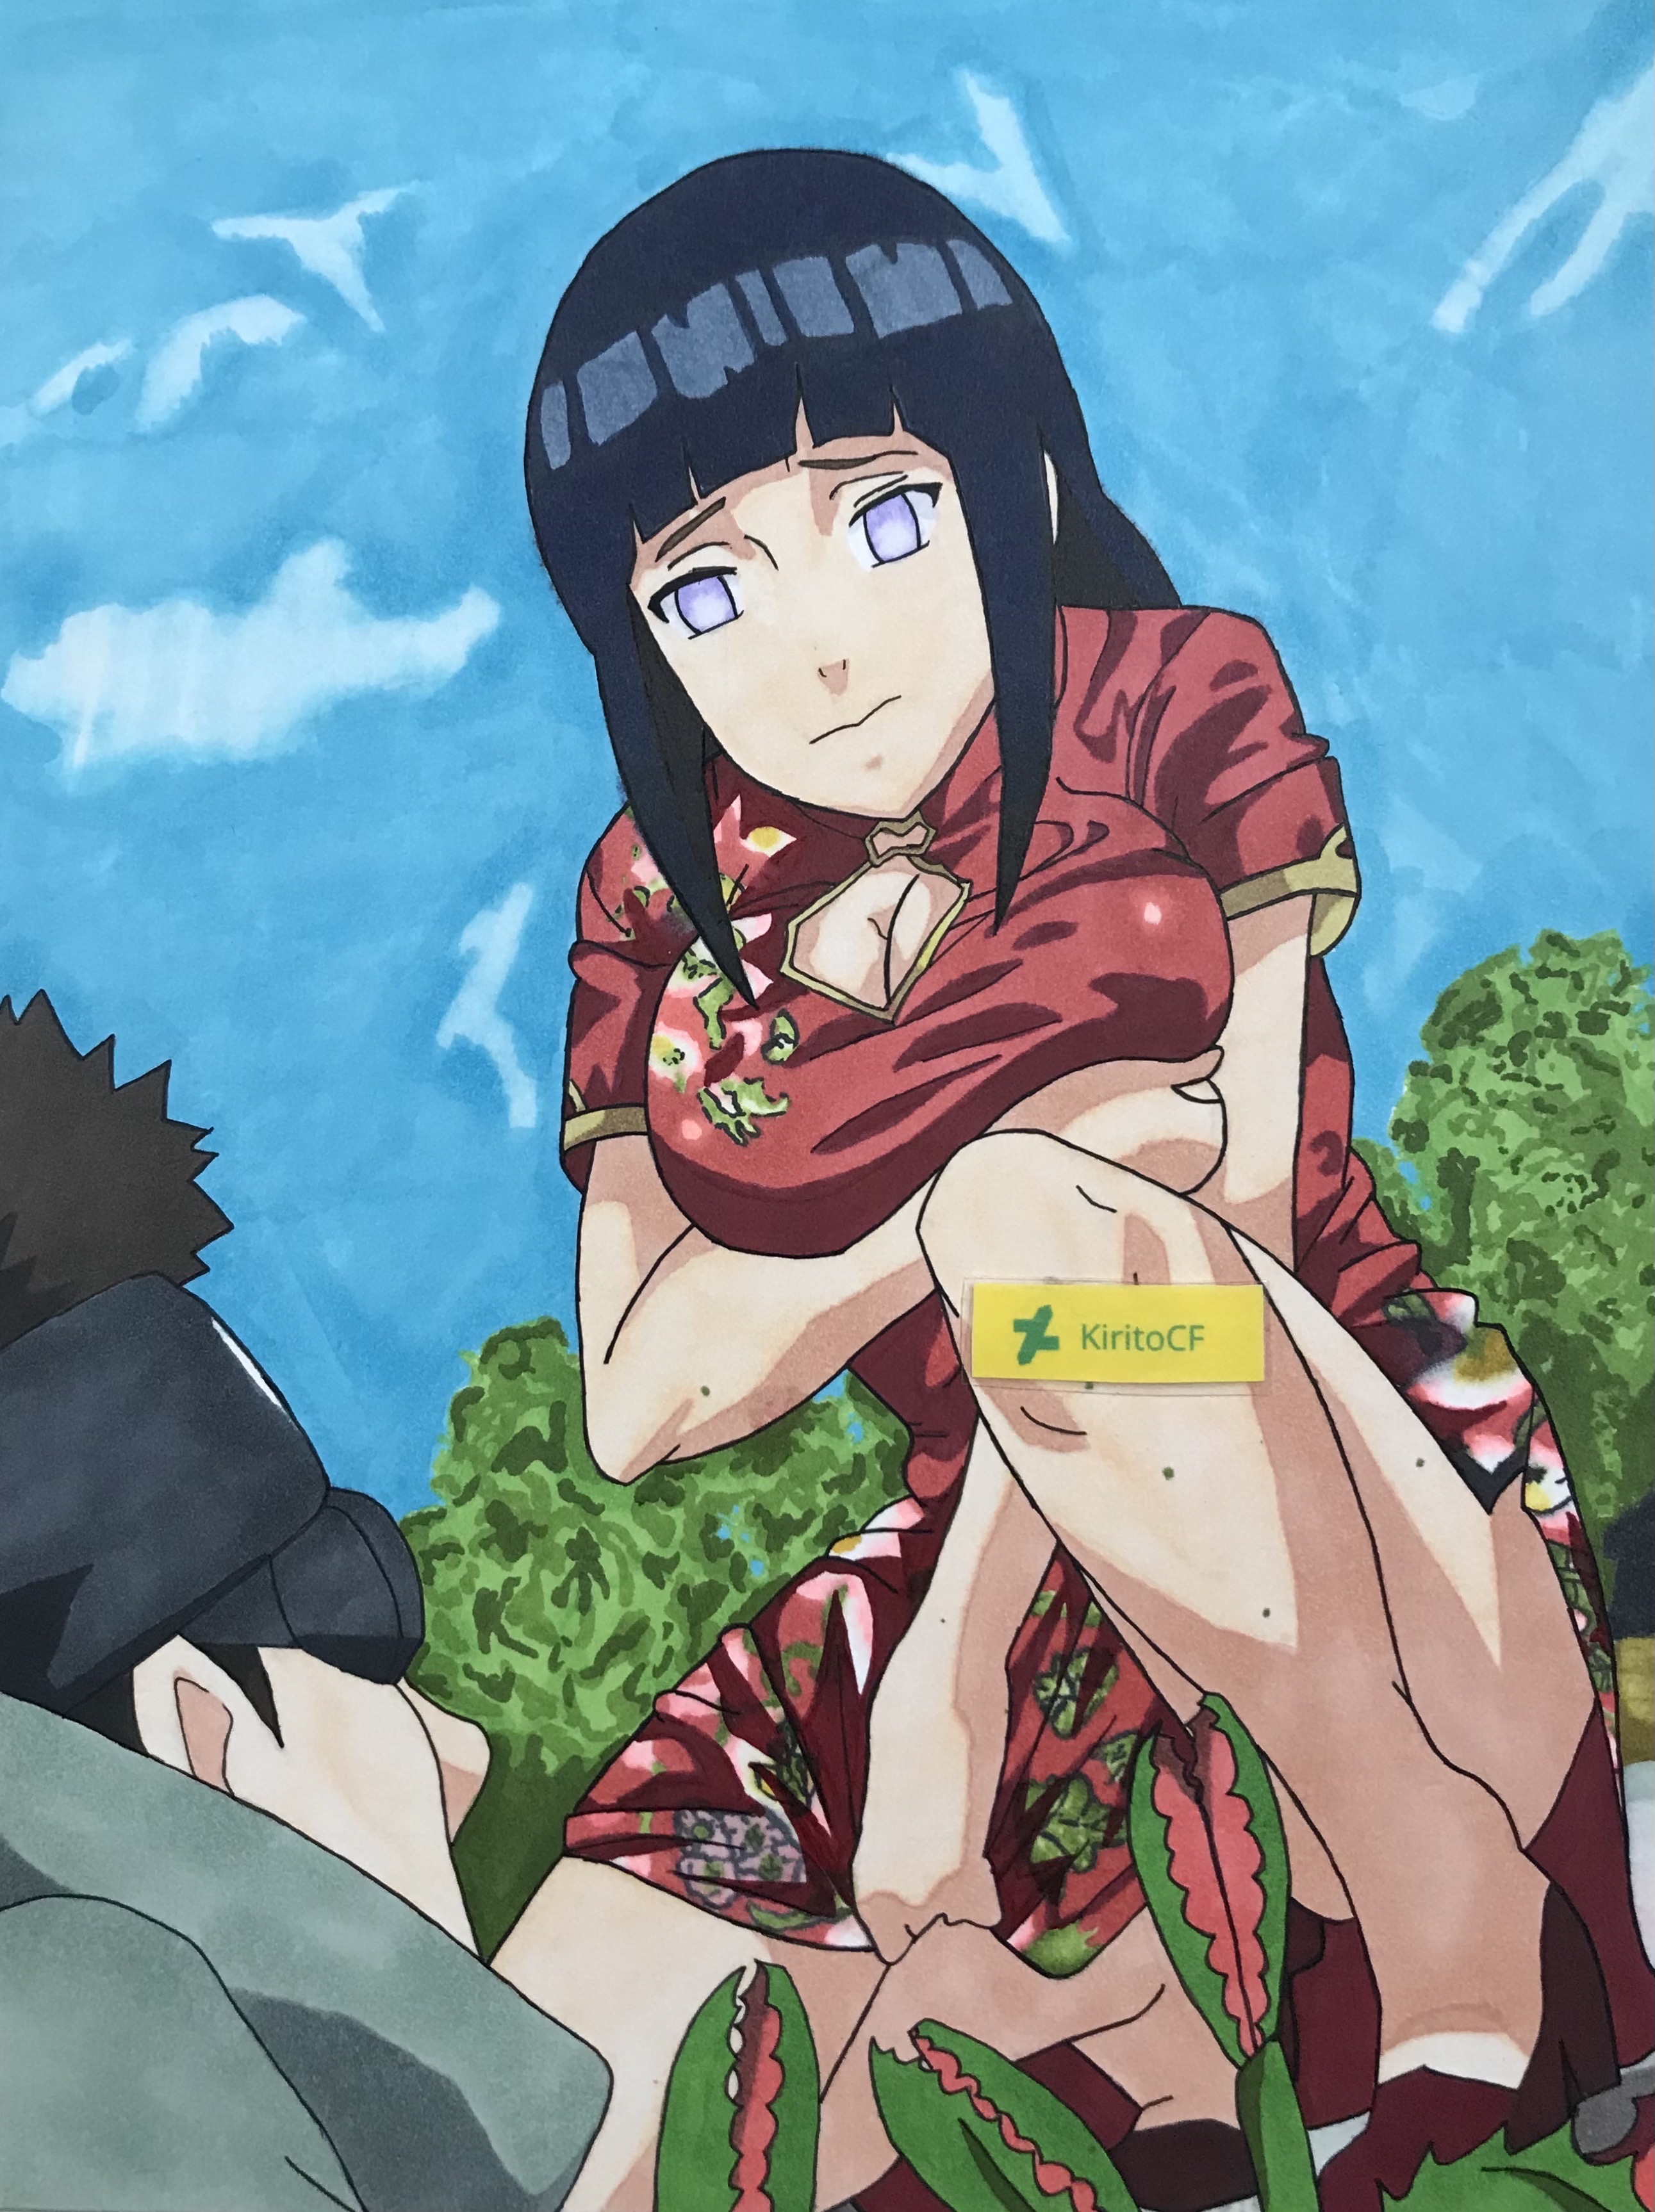 Hinata vs Pain in the Anime is a filler!!! by antonyjoy on DeviantArt